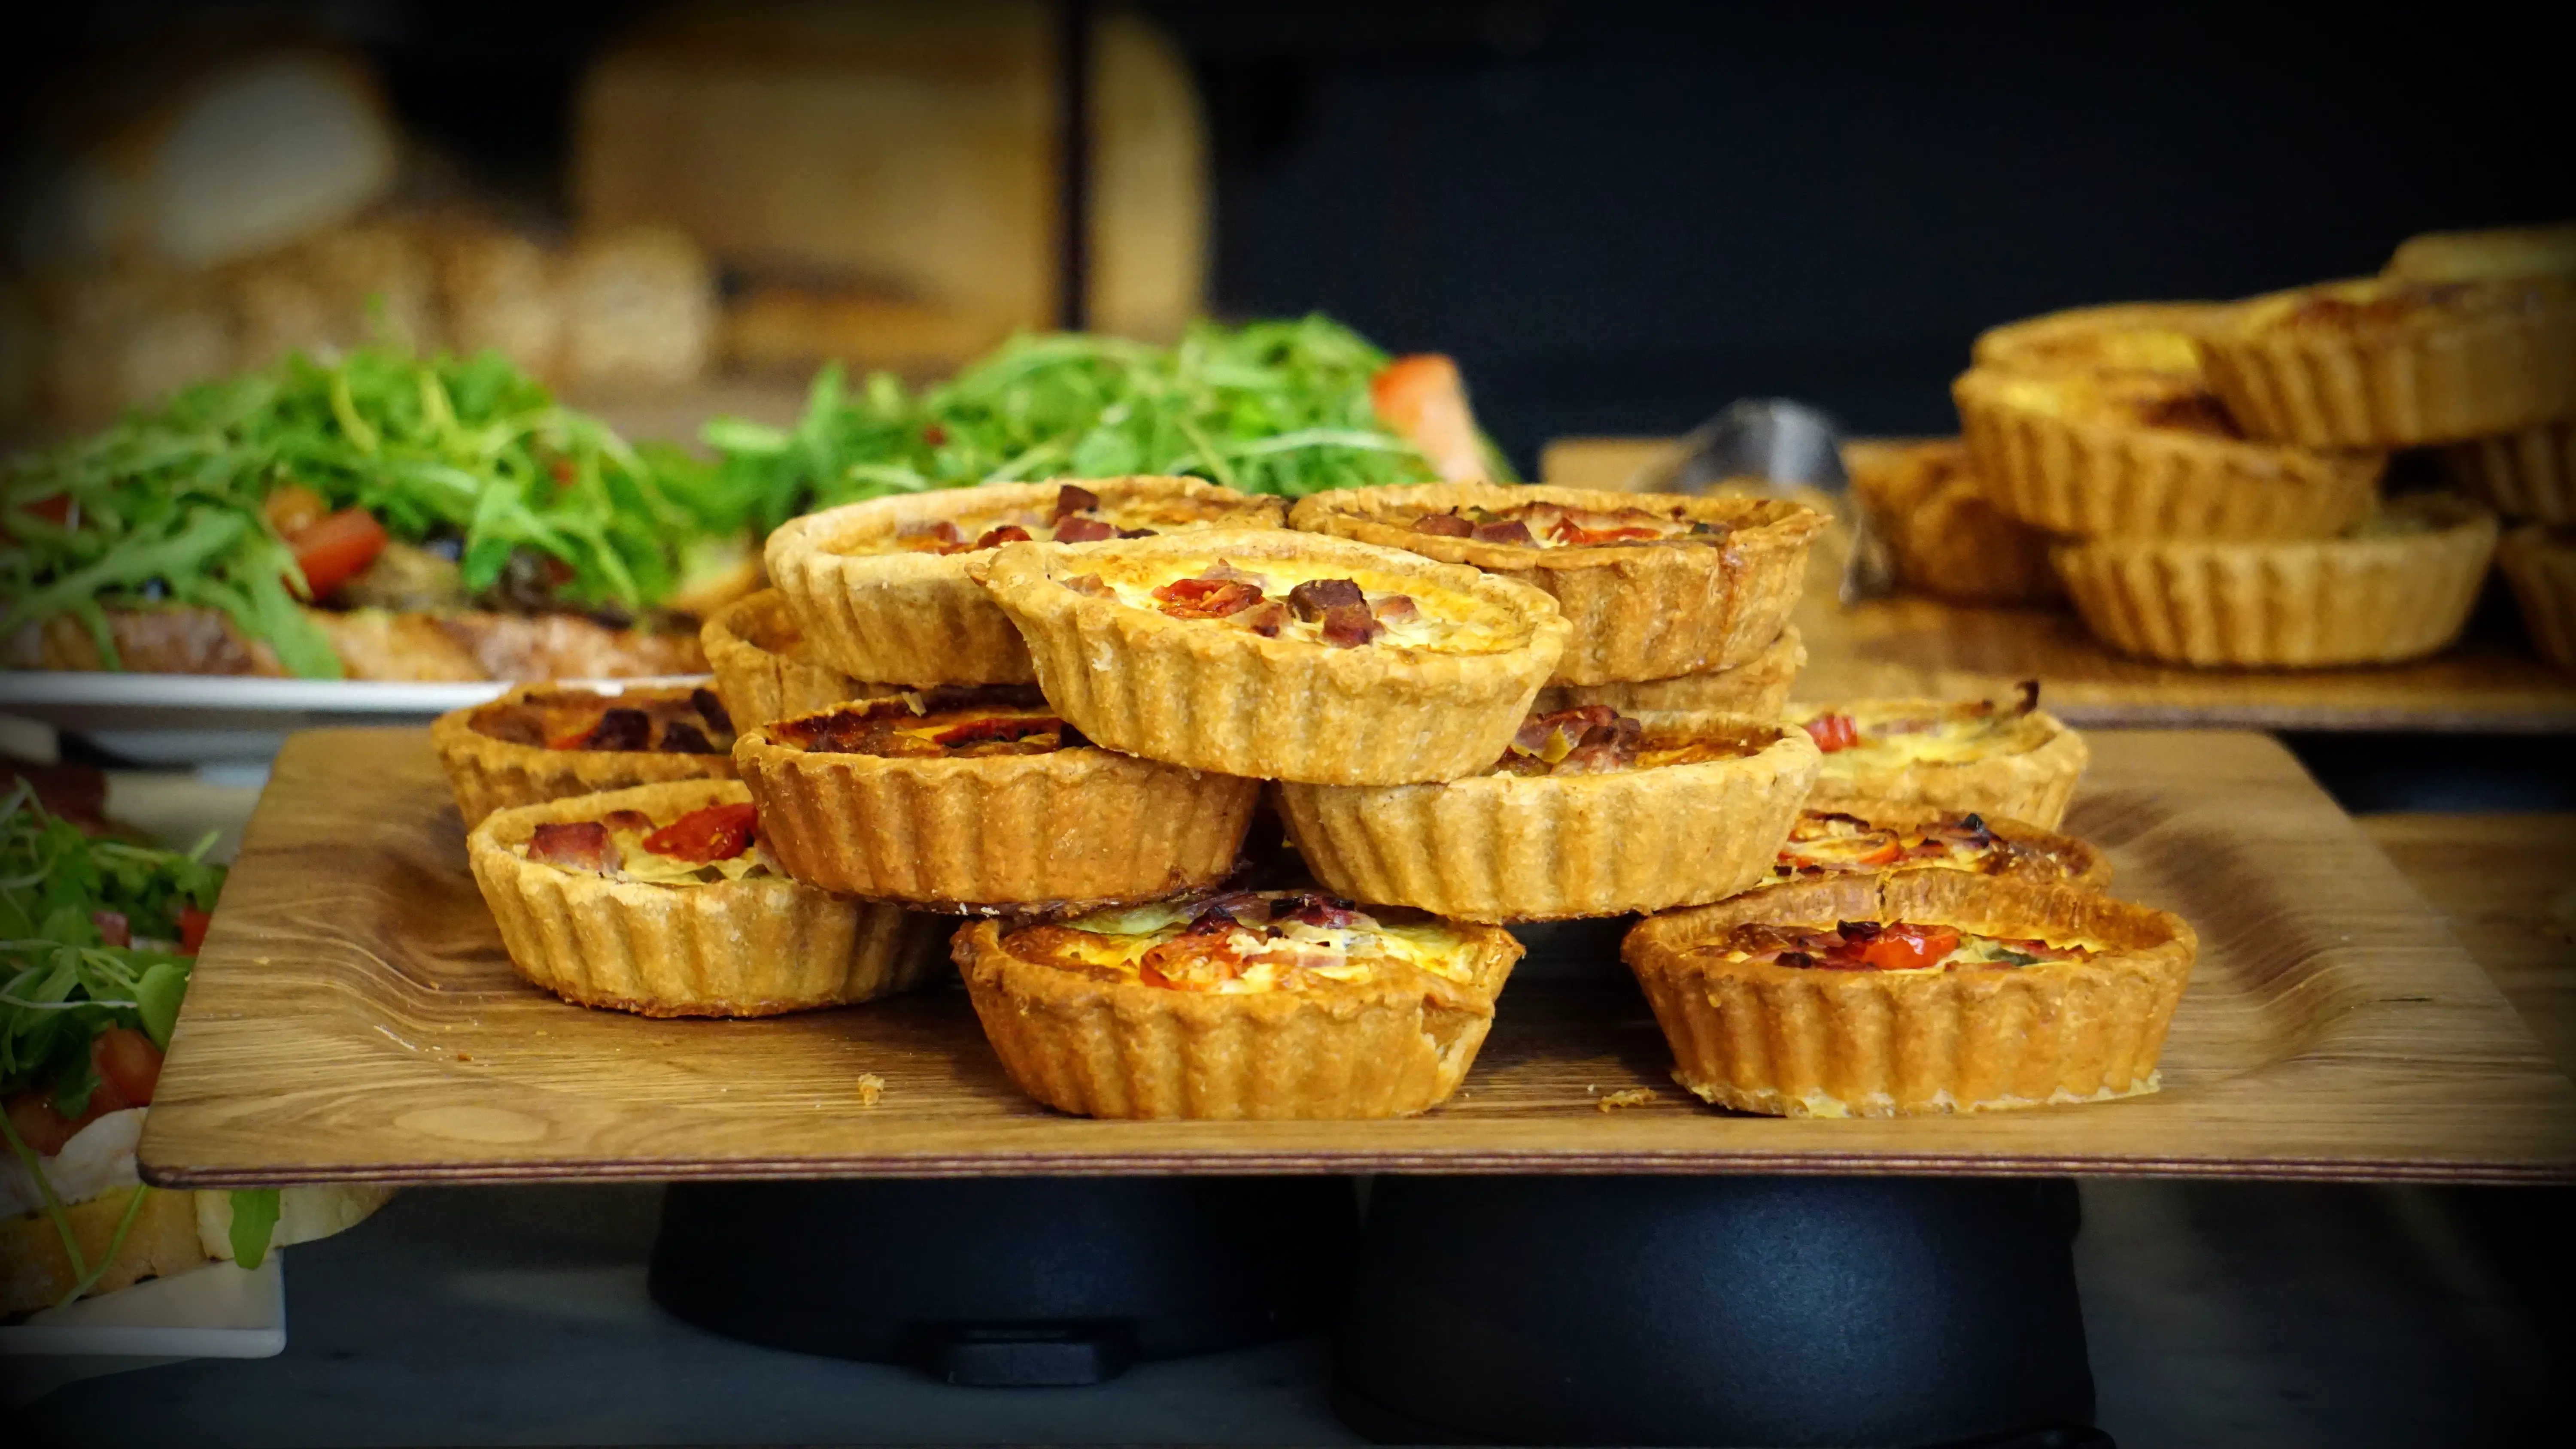 An in-depth review of the best quiche pans available in 2019.